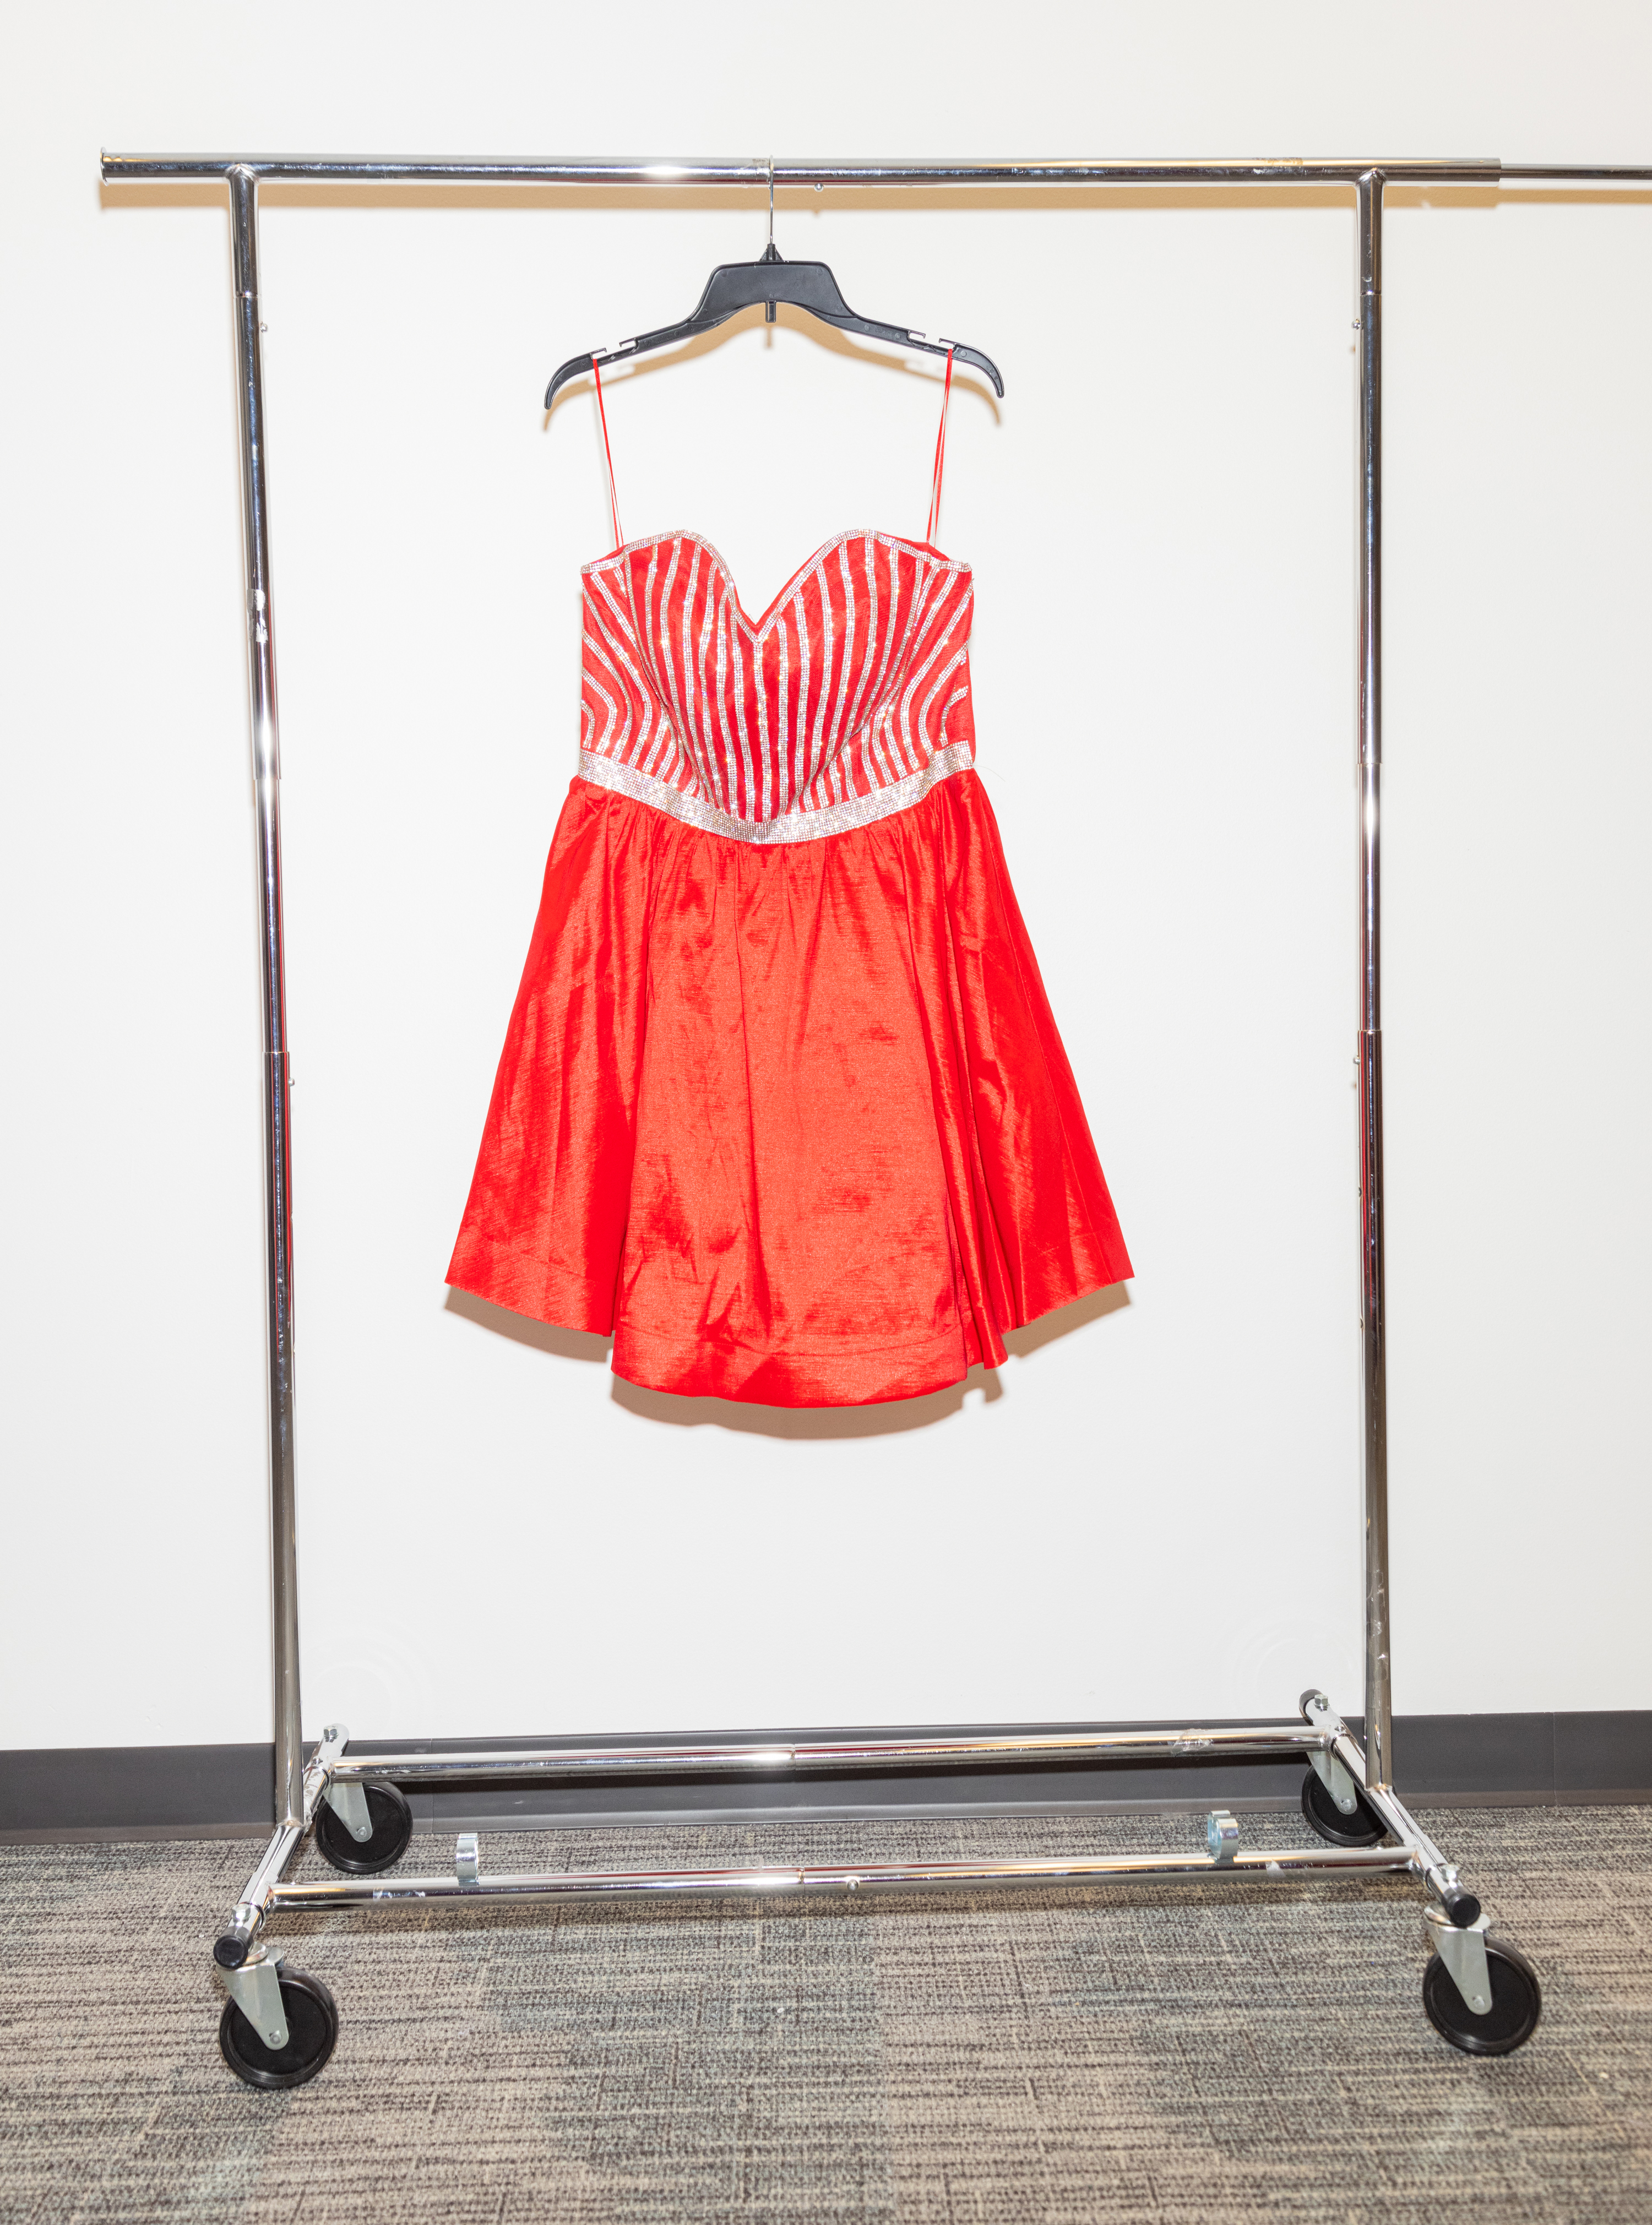 A red, strapless dress with white stripes and rhinestone accents, hanging on a rack against a white wall.